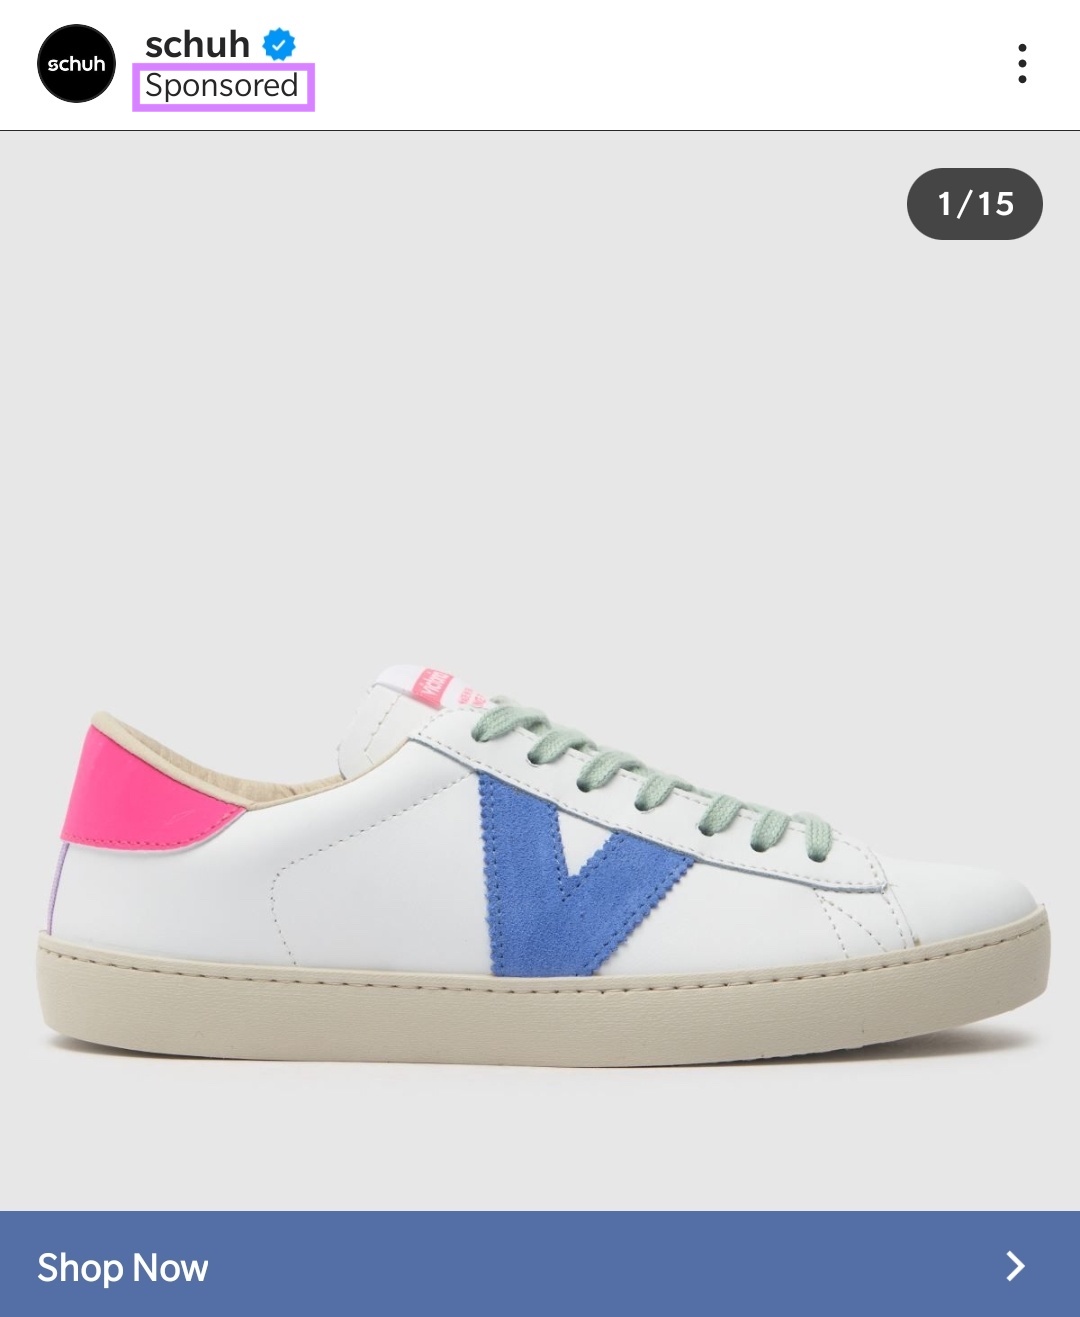 An Instagram in-app advertisement  for Veja sneakers by schuh